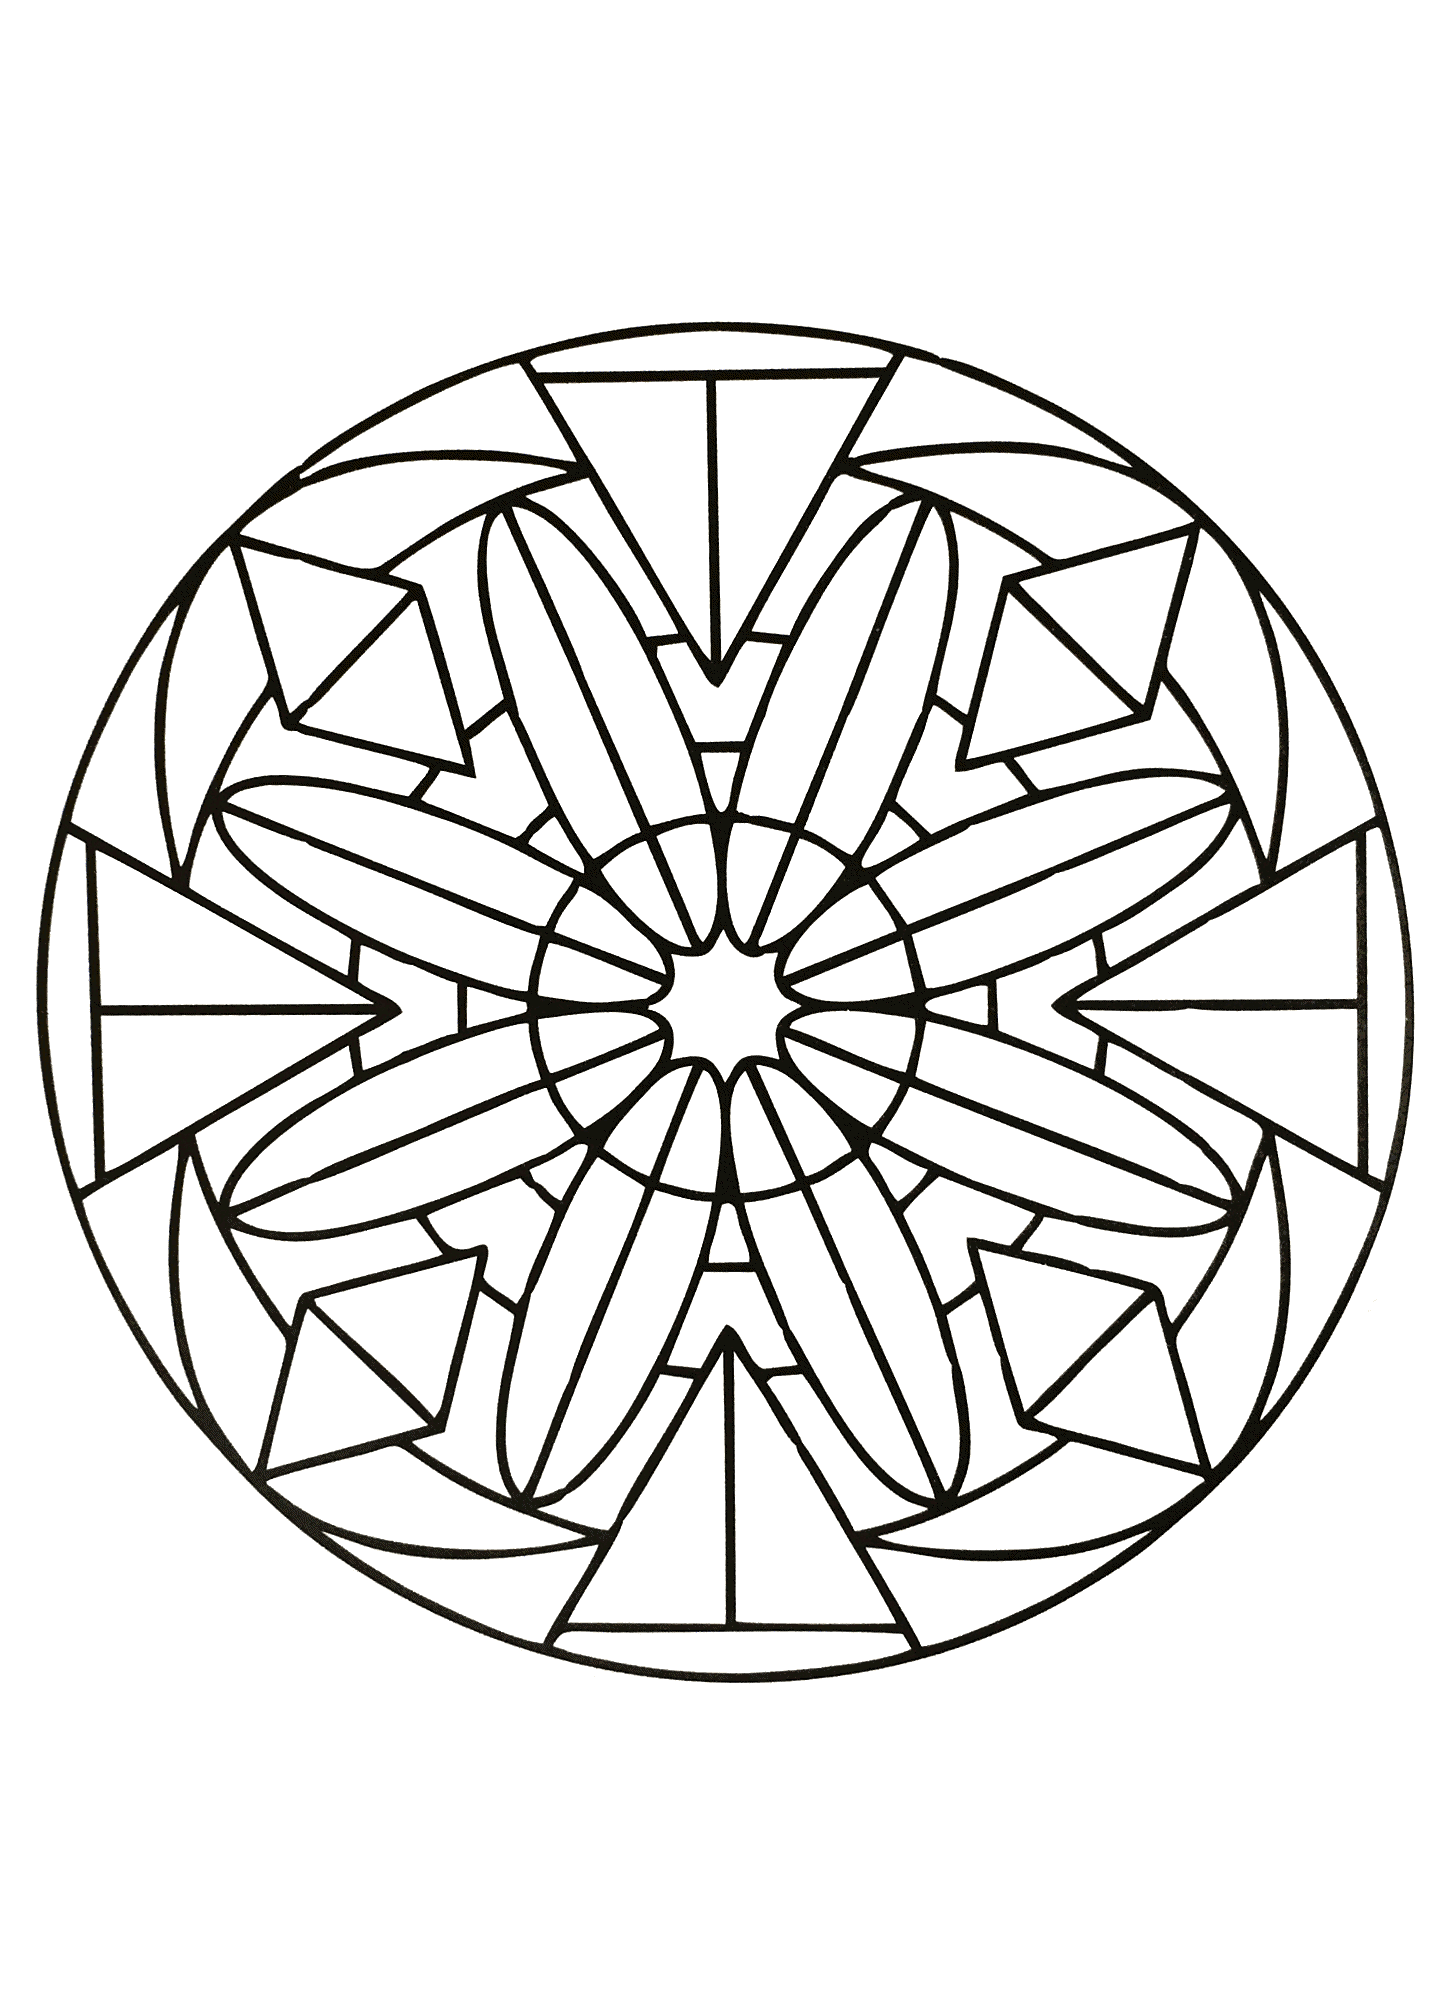 mandalas-free-to-color-for-children-mandalas-kids-coloring-pages